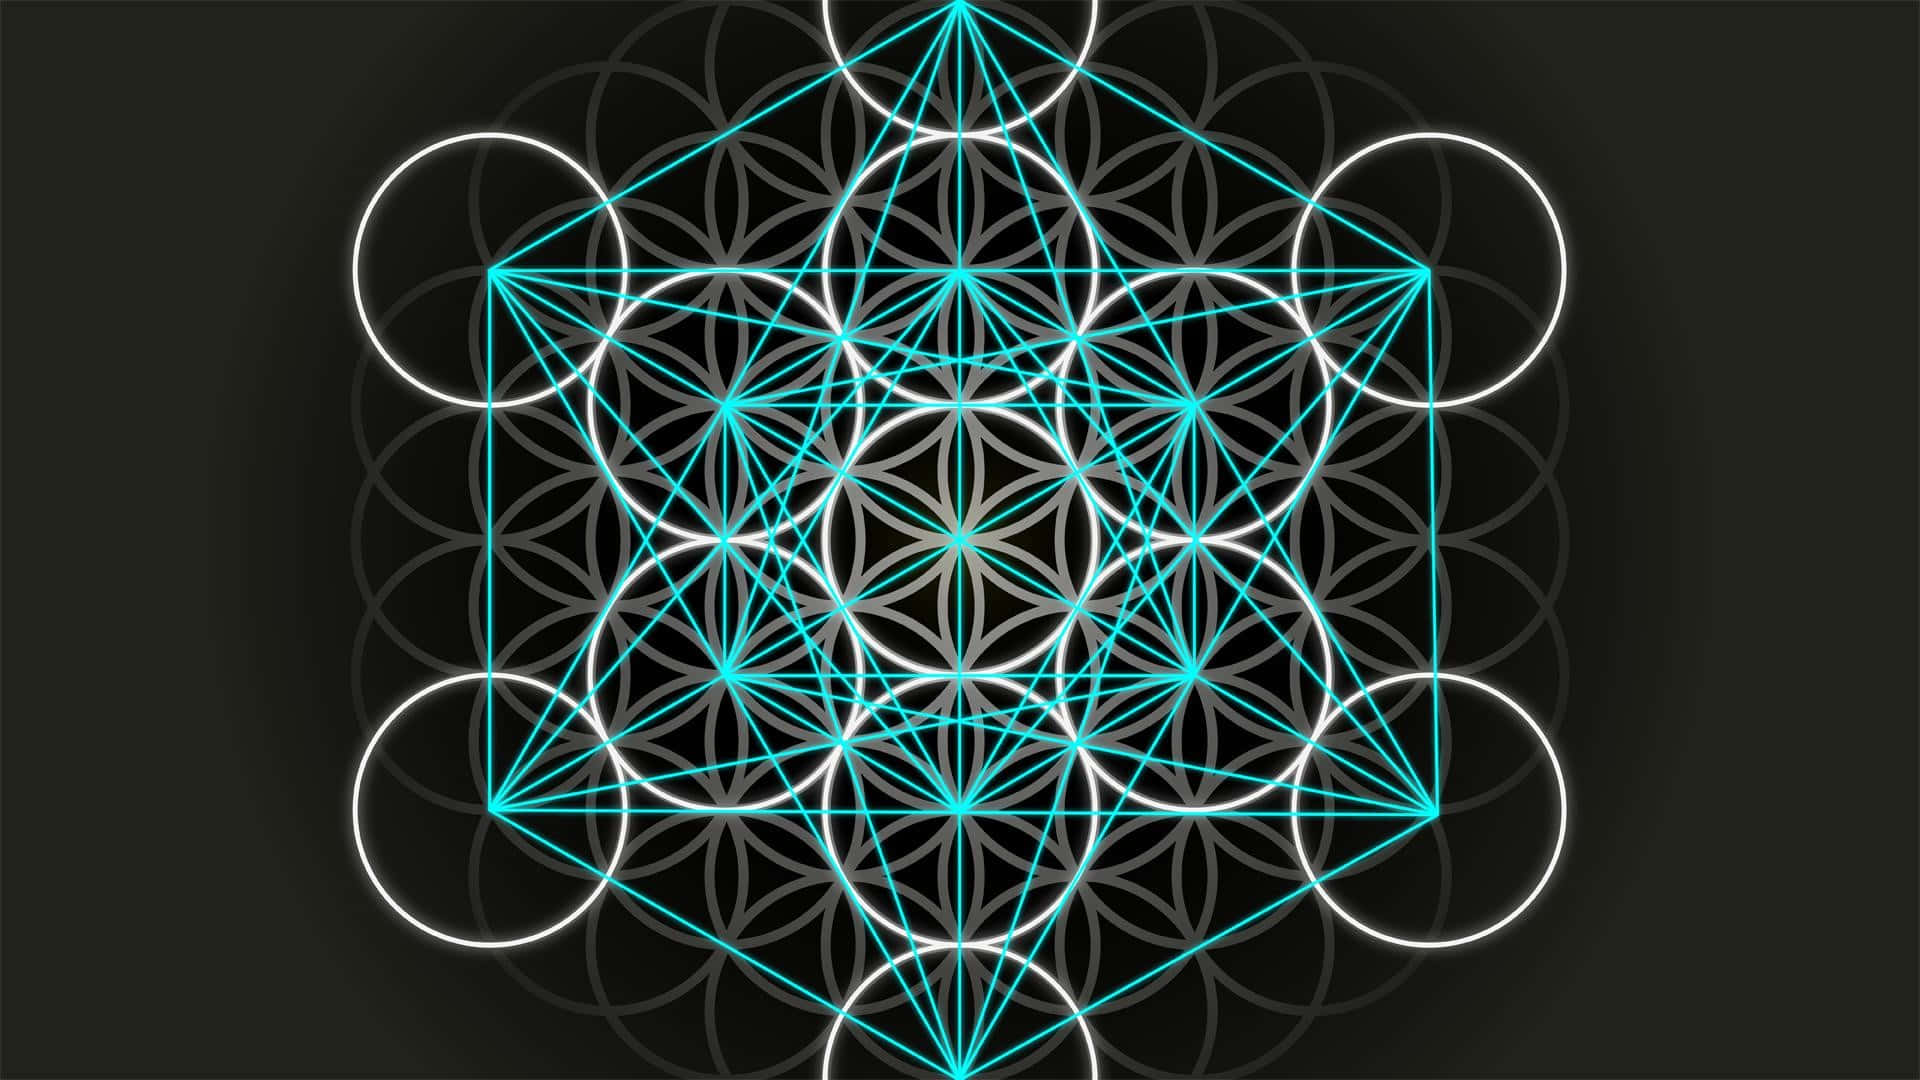 "The Geometric Beauty of the Flower of Life" Wallpaper